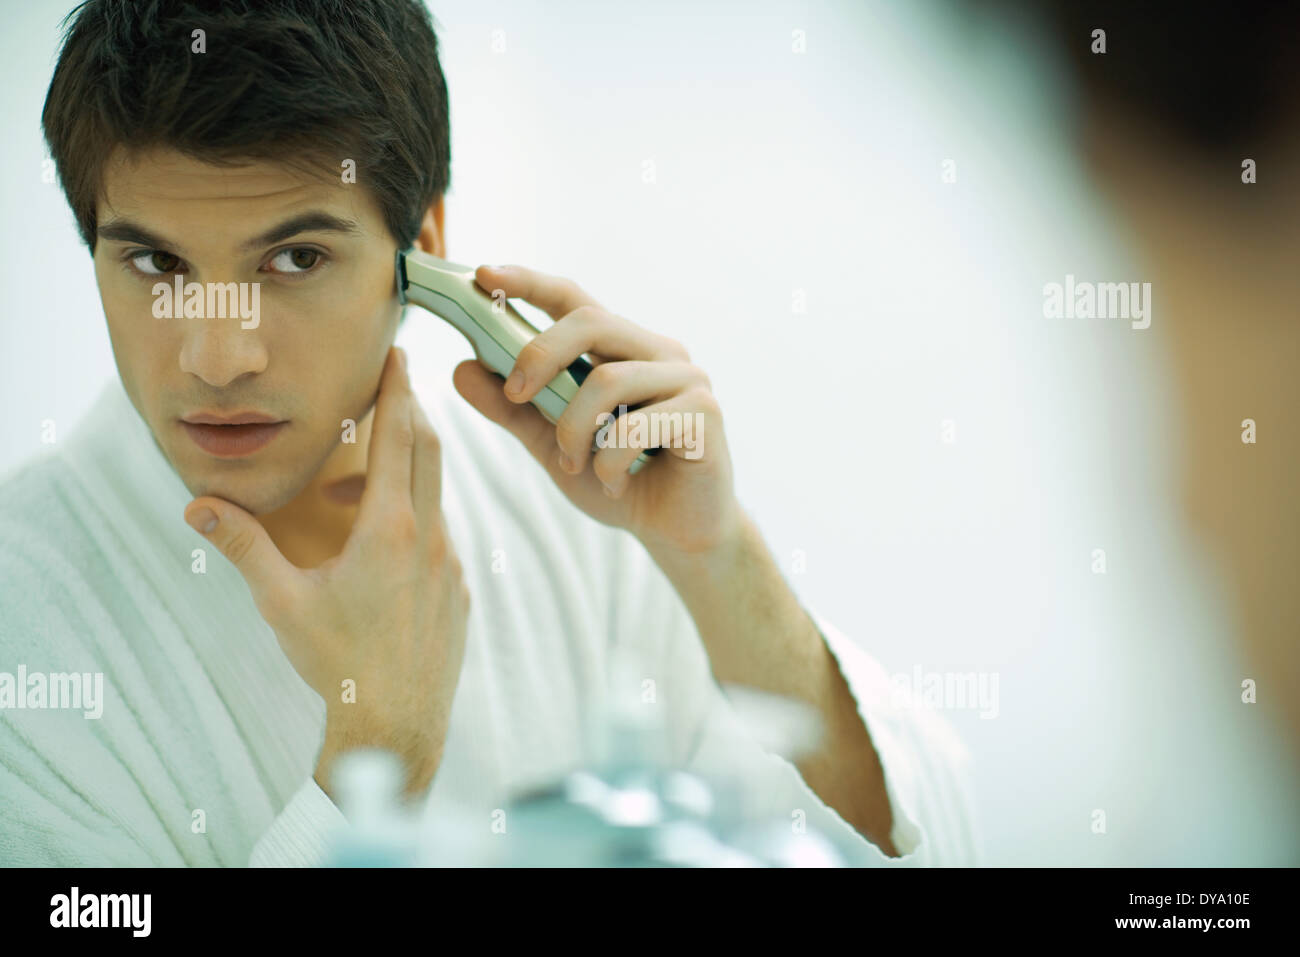 Young man looking in mirror, shaving with electric razor Stock Photo